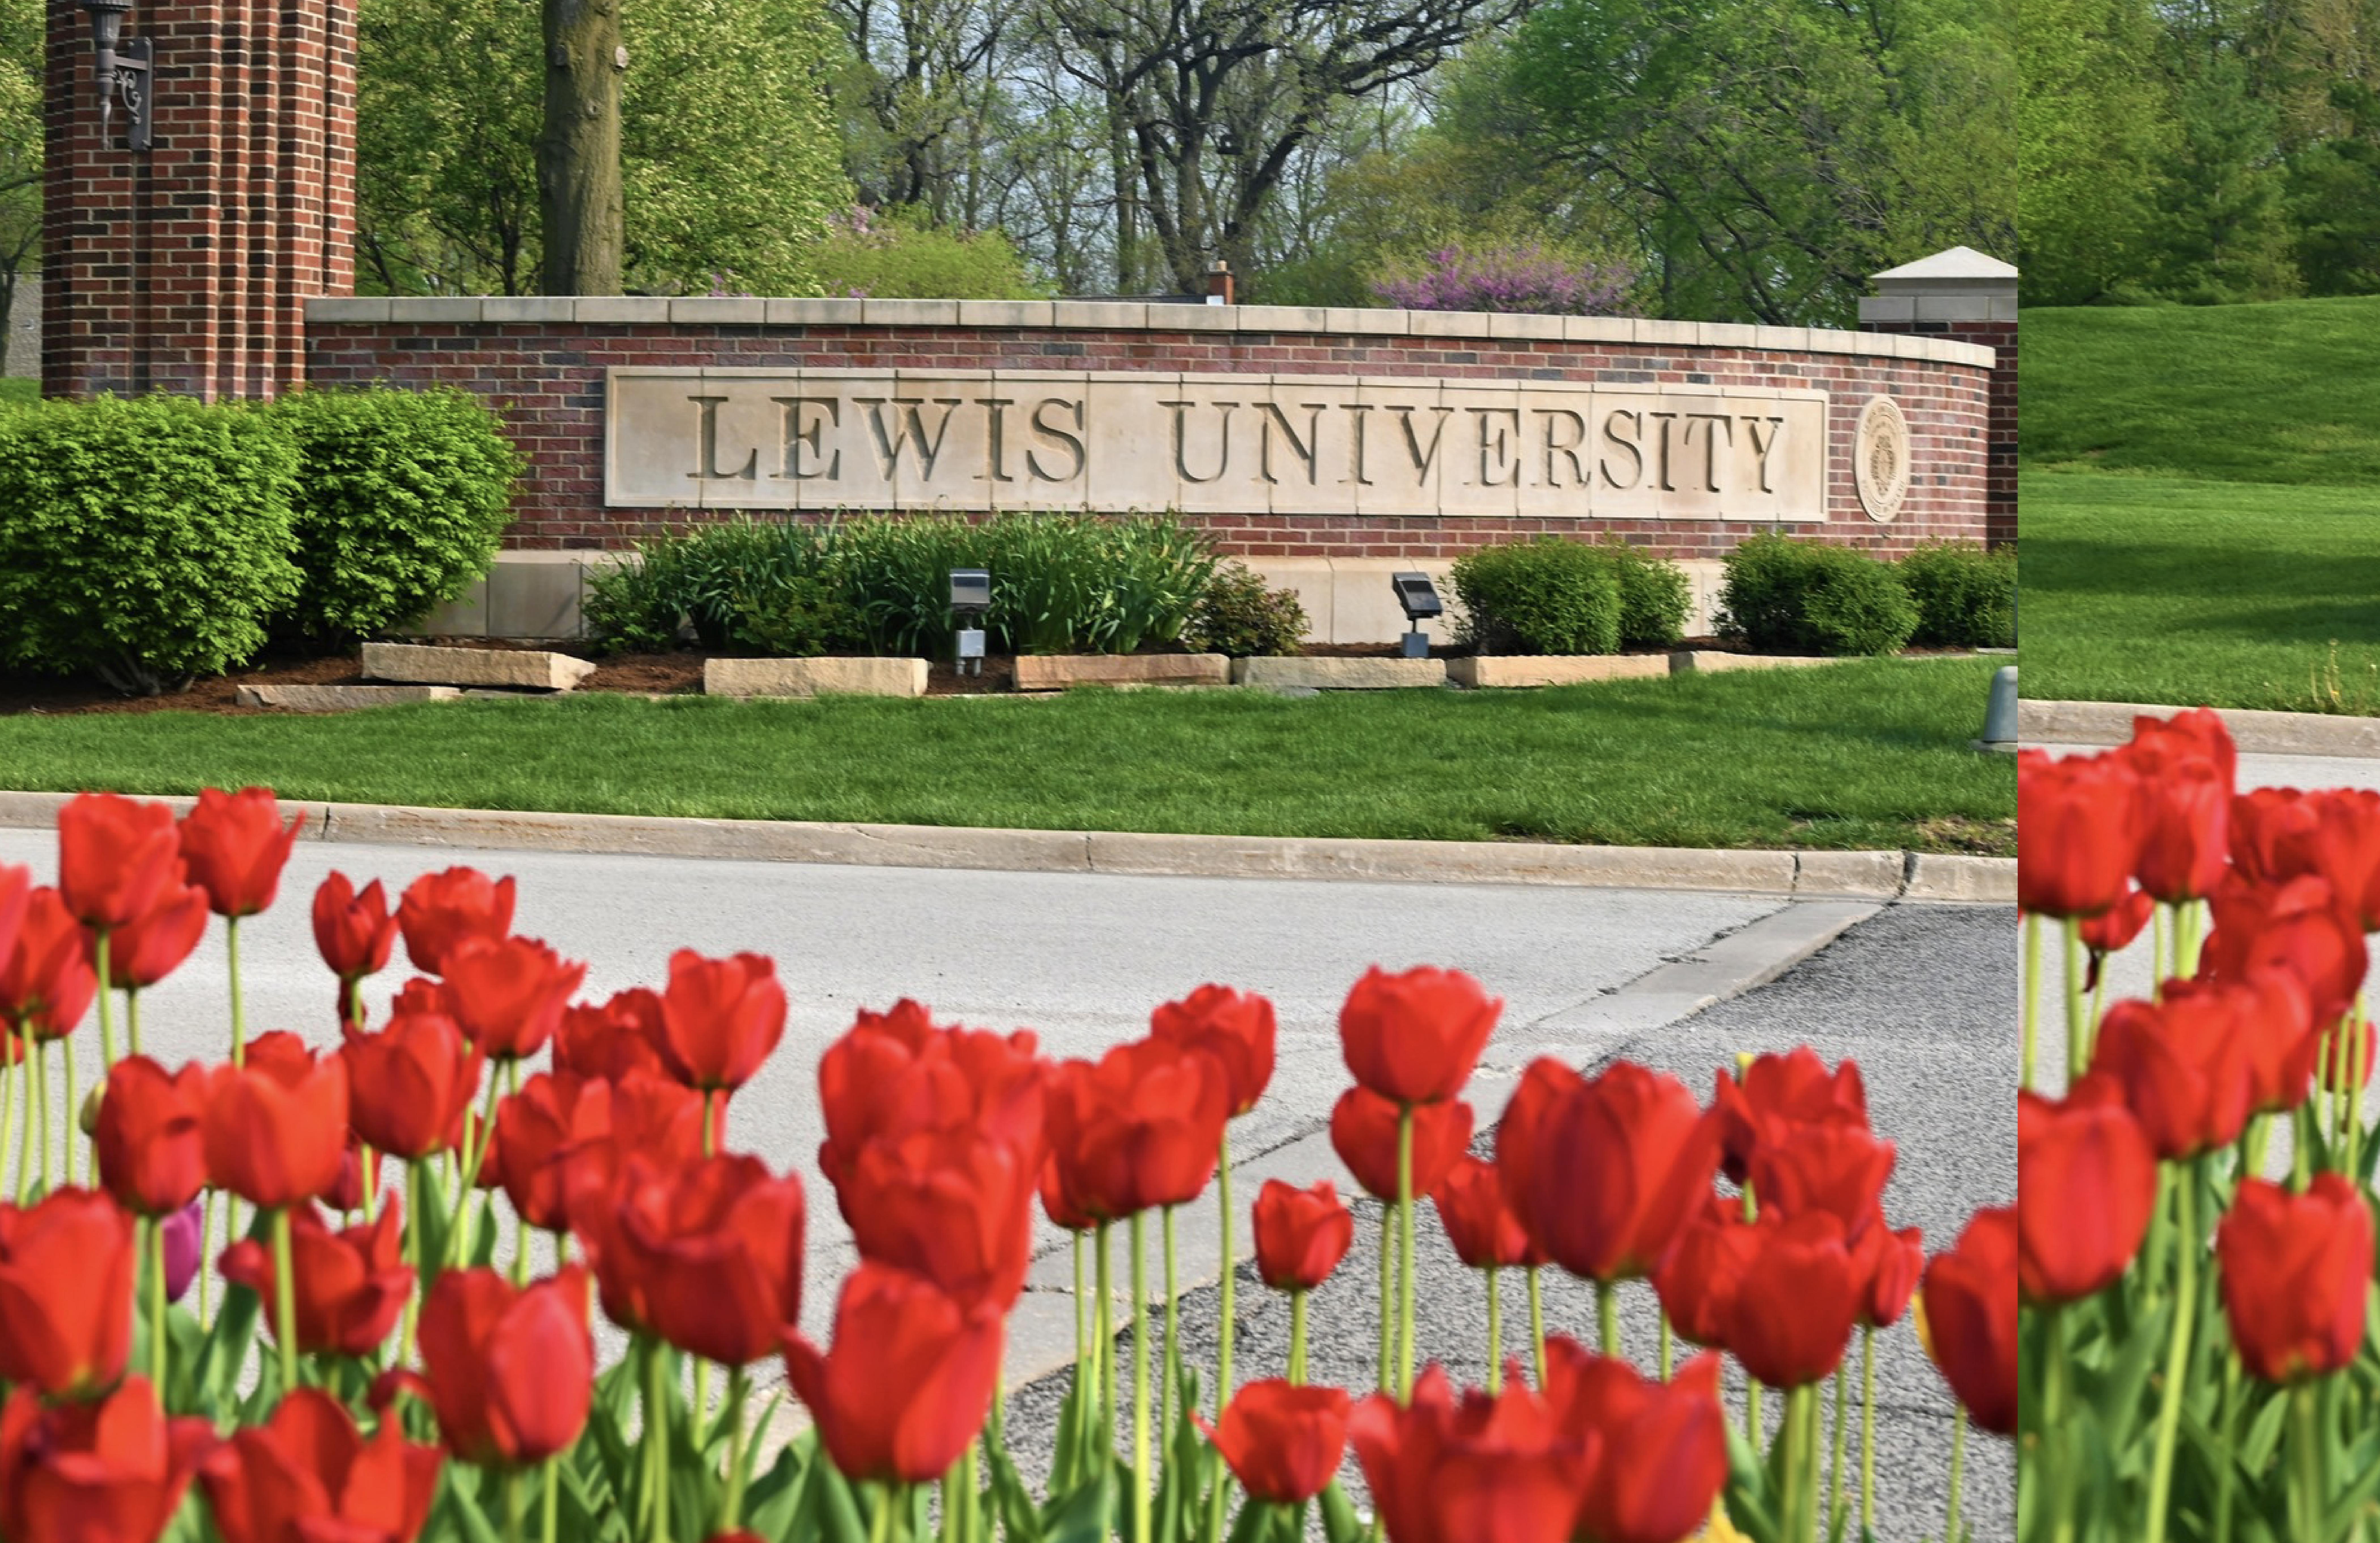 The Lewis University sign on a stone wall behind red tulips